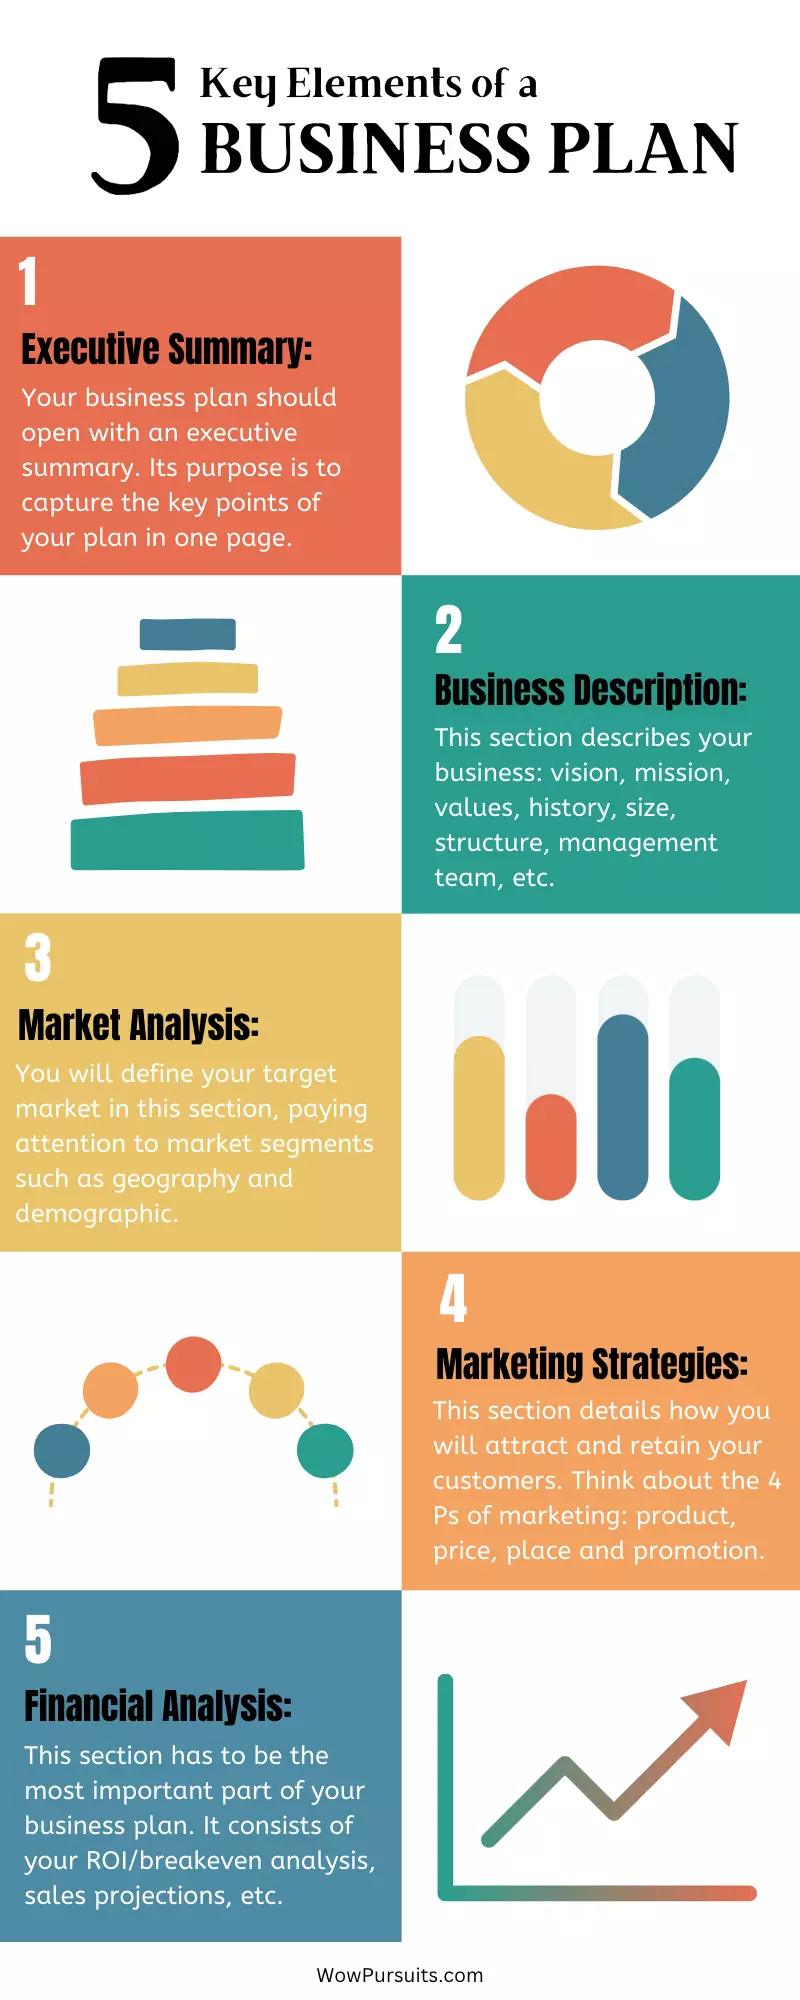 Infographic: 5 key elements of a business plan - executive summary, business description, market analysis, marketing strategies and financial analysis.